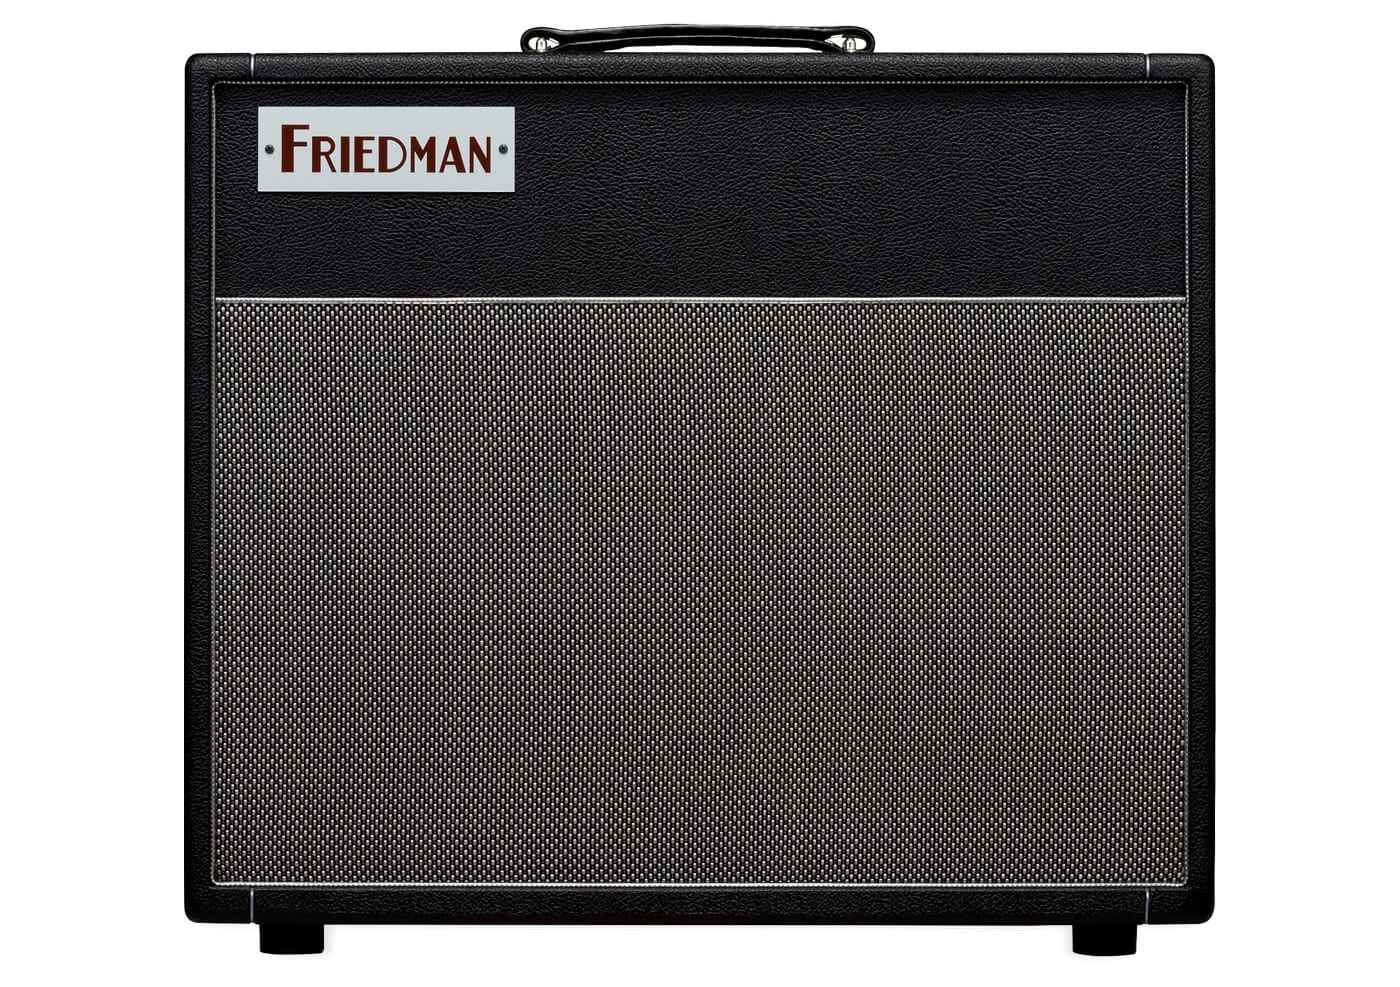 Friedman Twin Sister combo - Two Dirty Shirleys in one amp